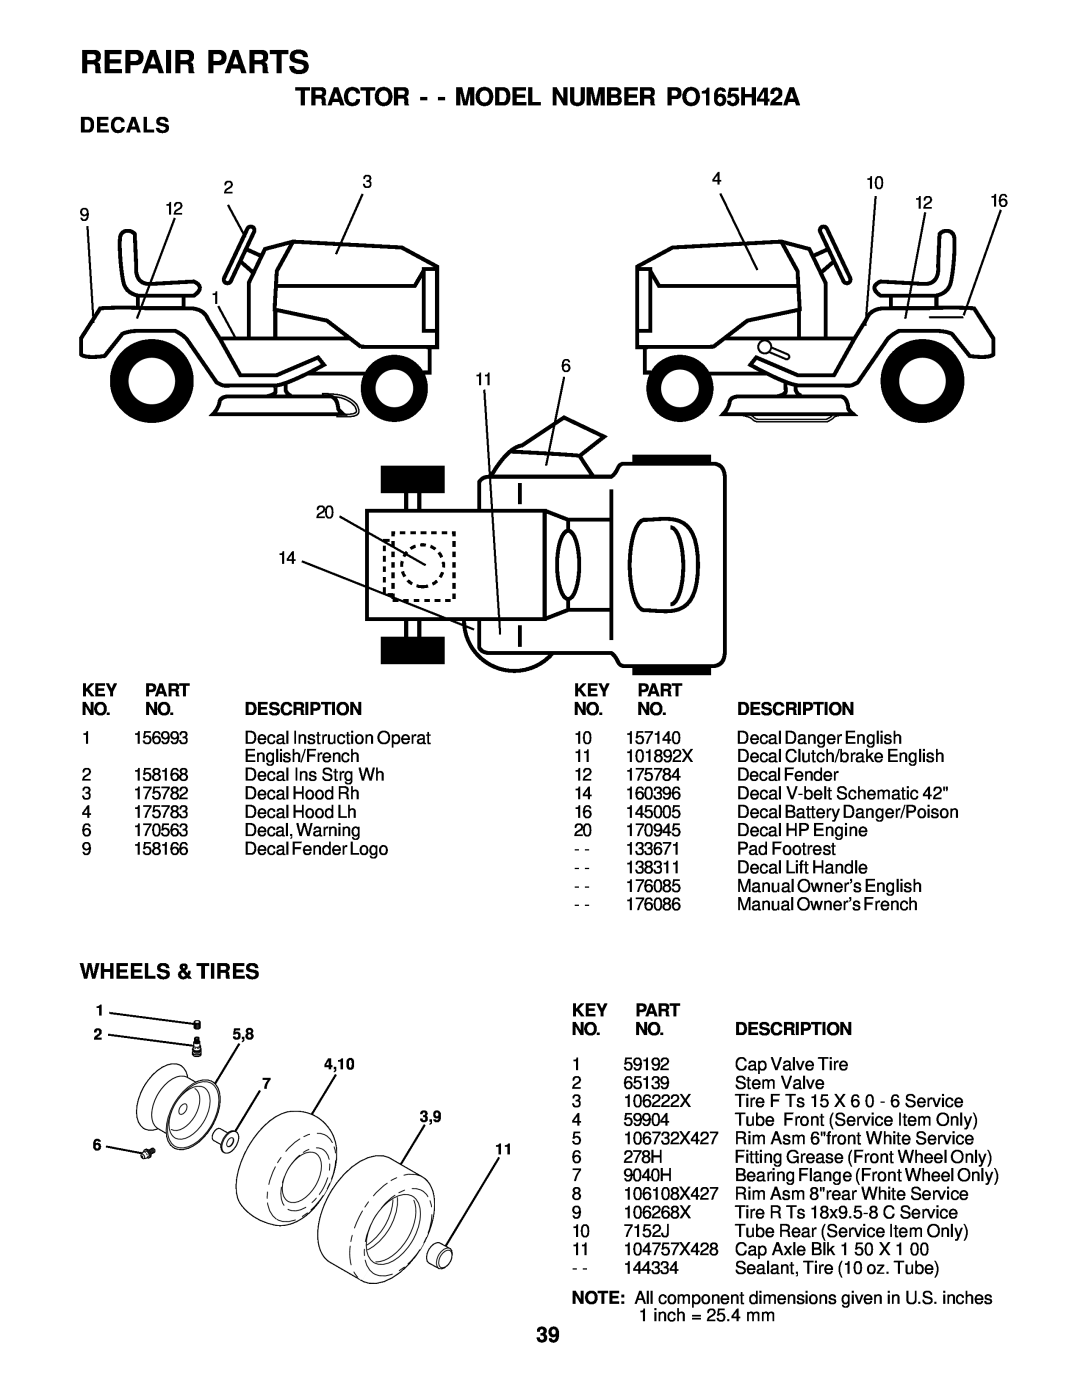 Poulan owner manual Decals, Wheels & Tires, Repair Parts, TRACTOR - - MODEL NUMBER PO165H42A 